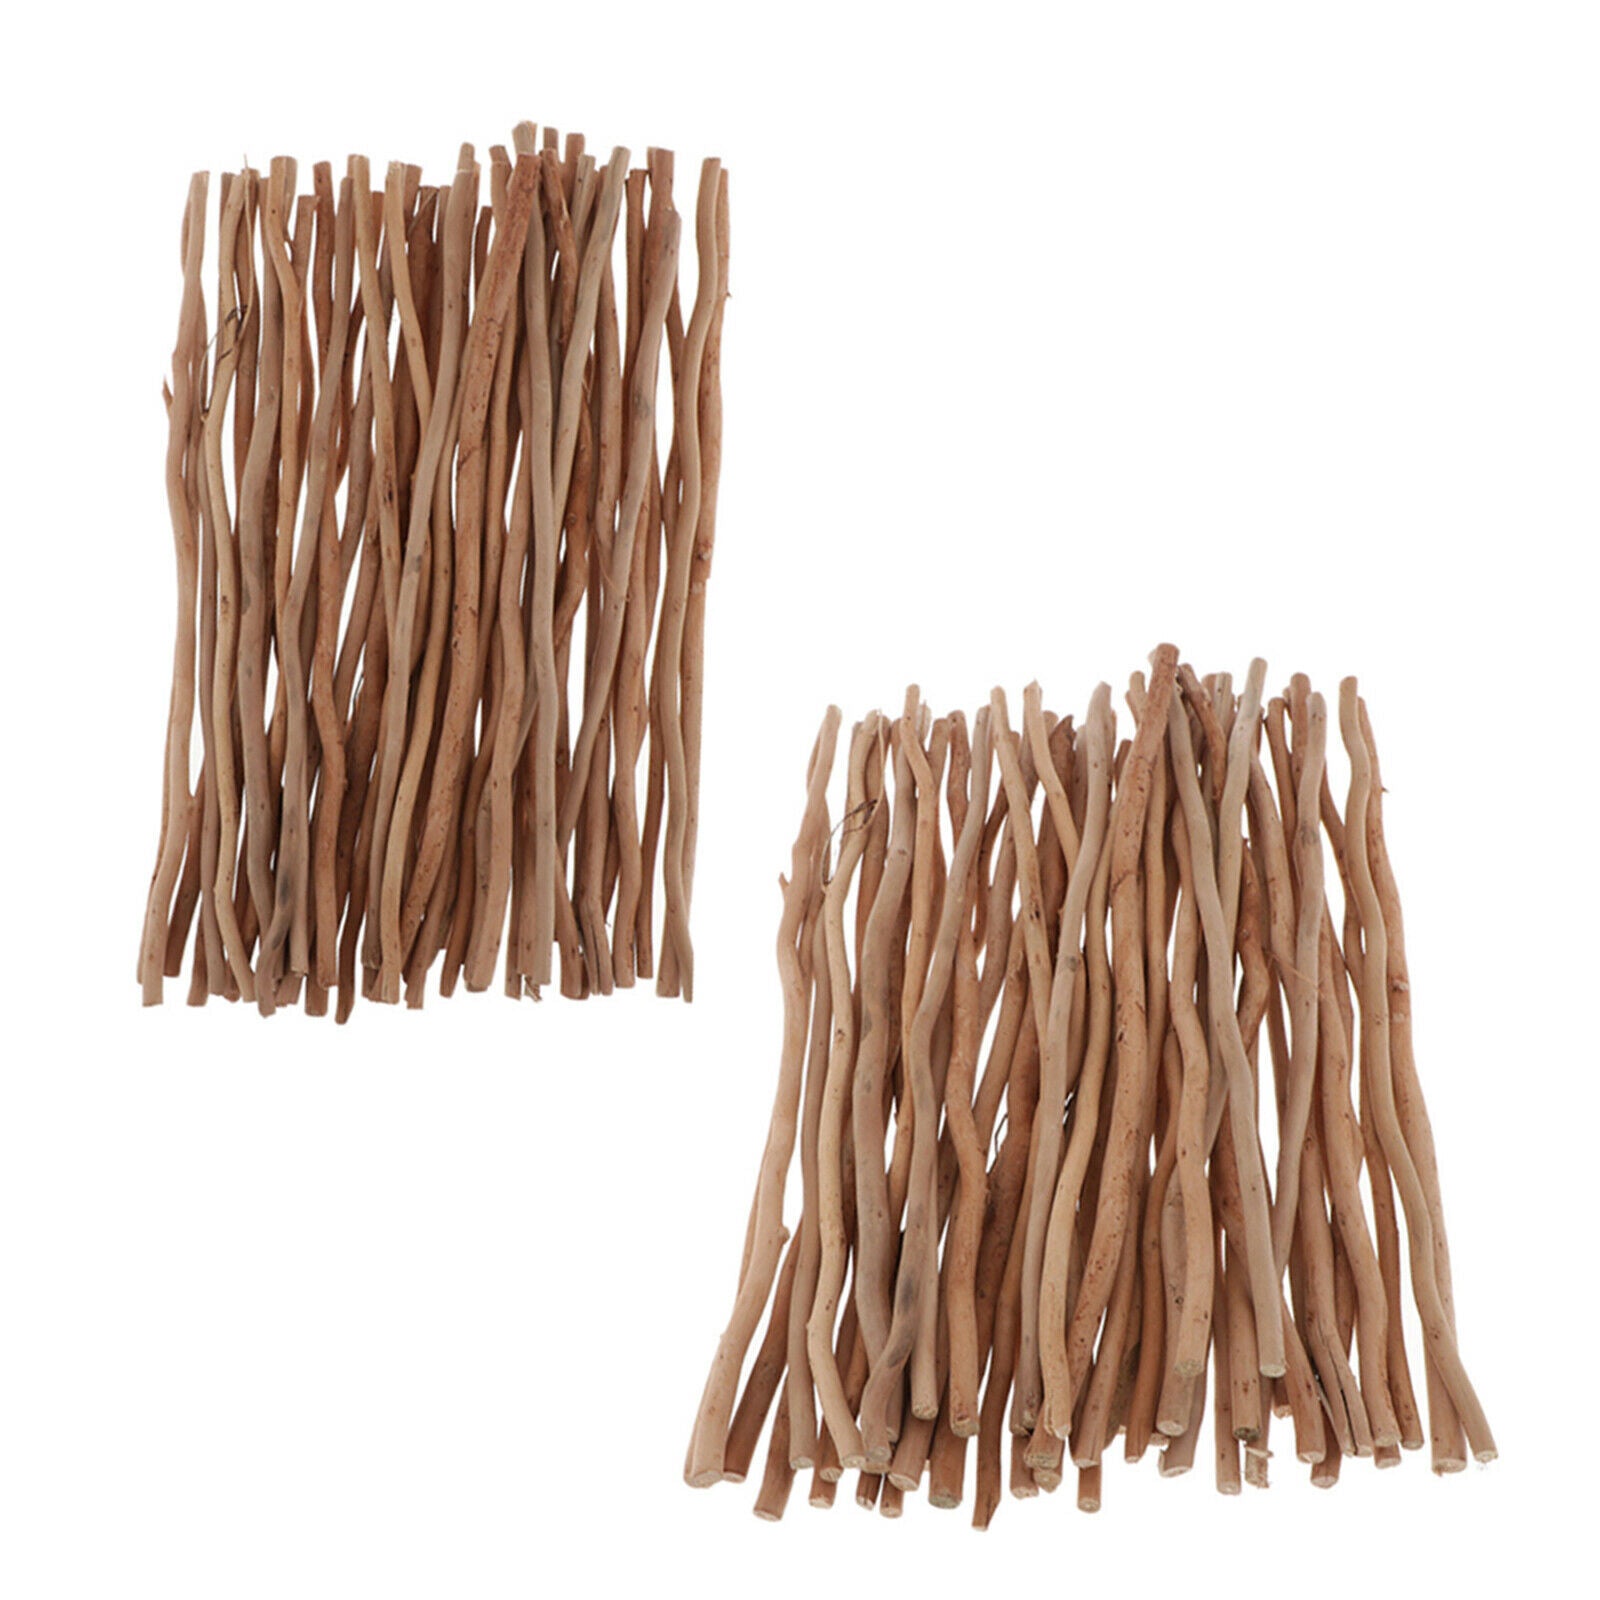 100Pc Natural Wood Rustic Rods Branch Twigs DIY Art Woodworking Material 30/40cm